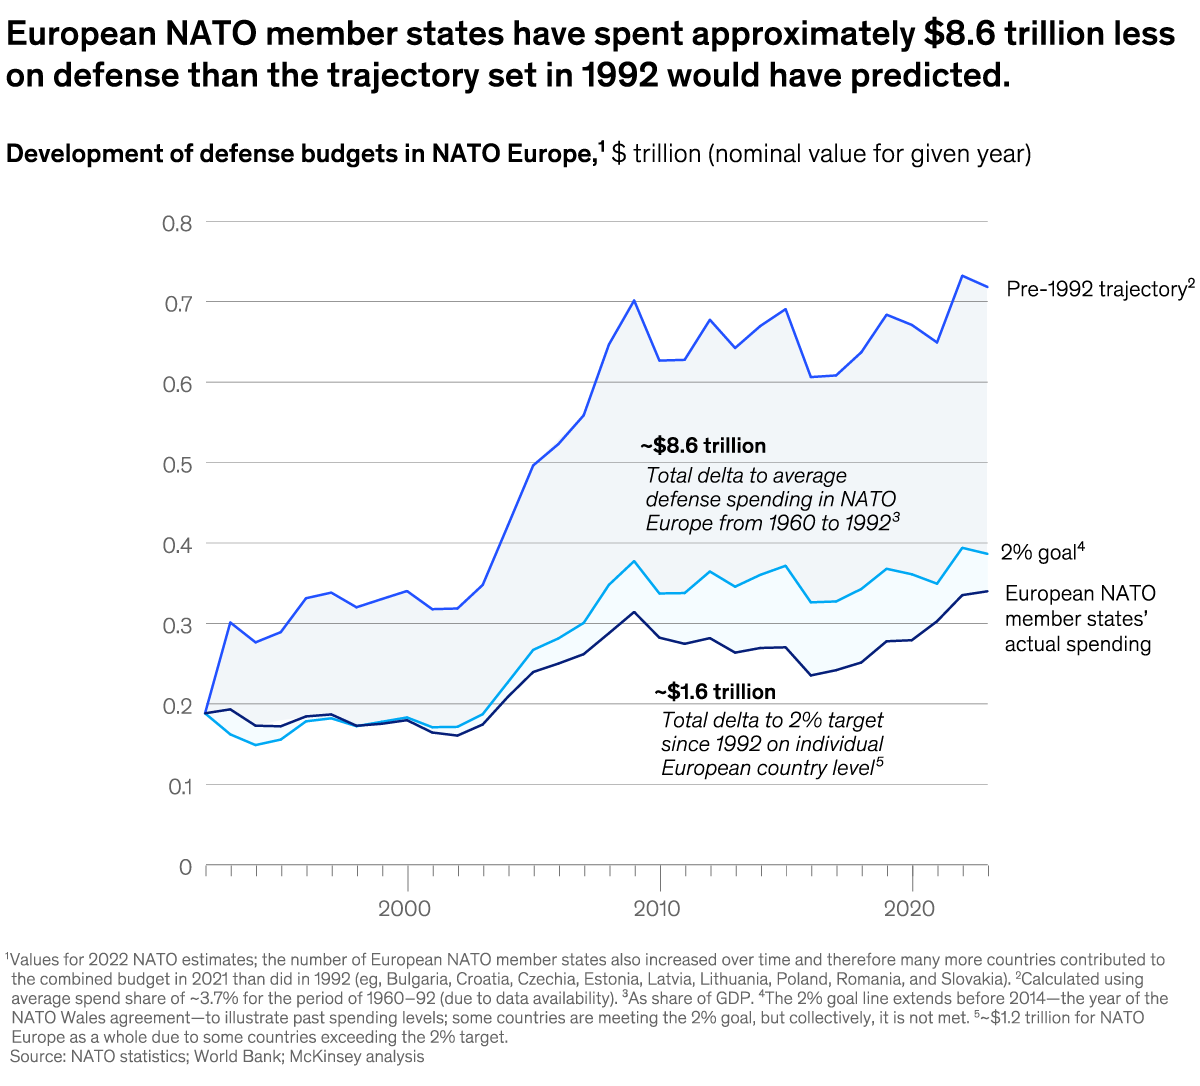 A chart titled “European NATO member states have spent approximately $8.6 trillion less on defense than the trajectory set in 1992 would have predicted.” Click to open the full article on McKinsey.com.